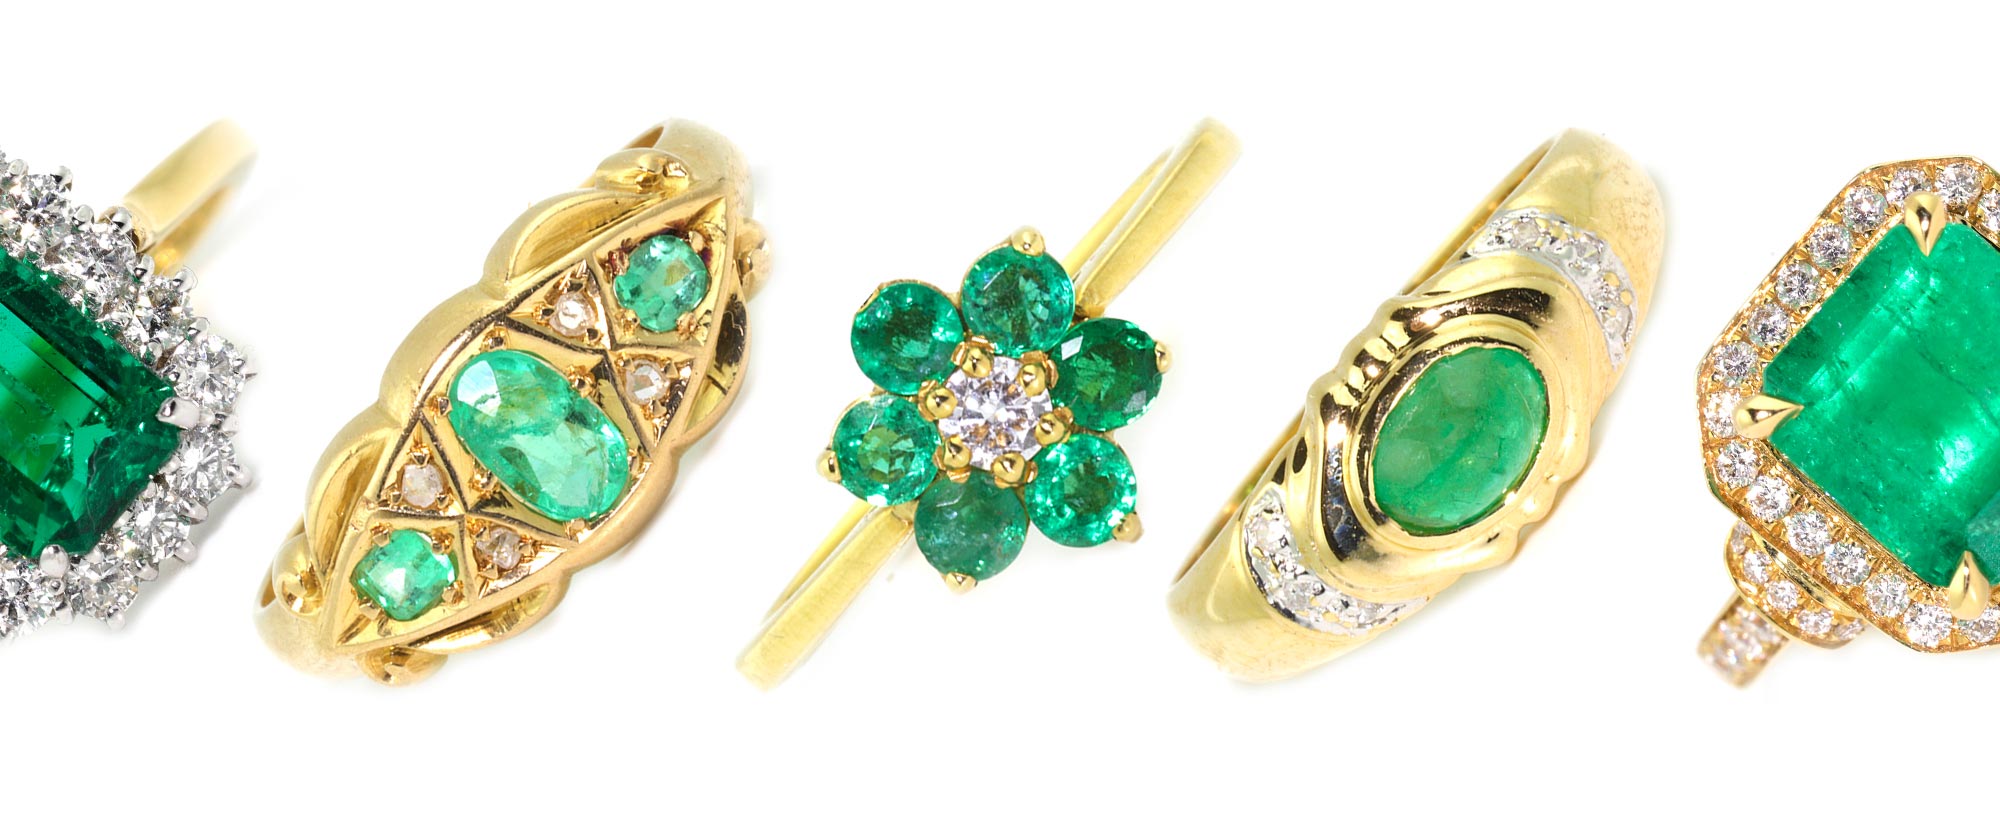 Selection of emerald rings from Studley Jewellers Wells UK